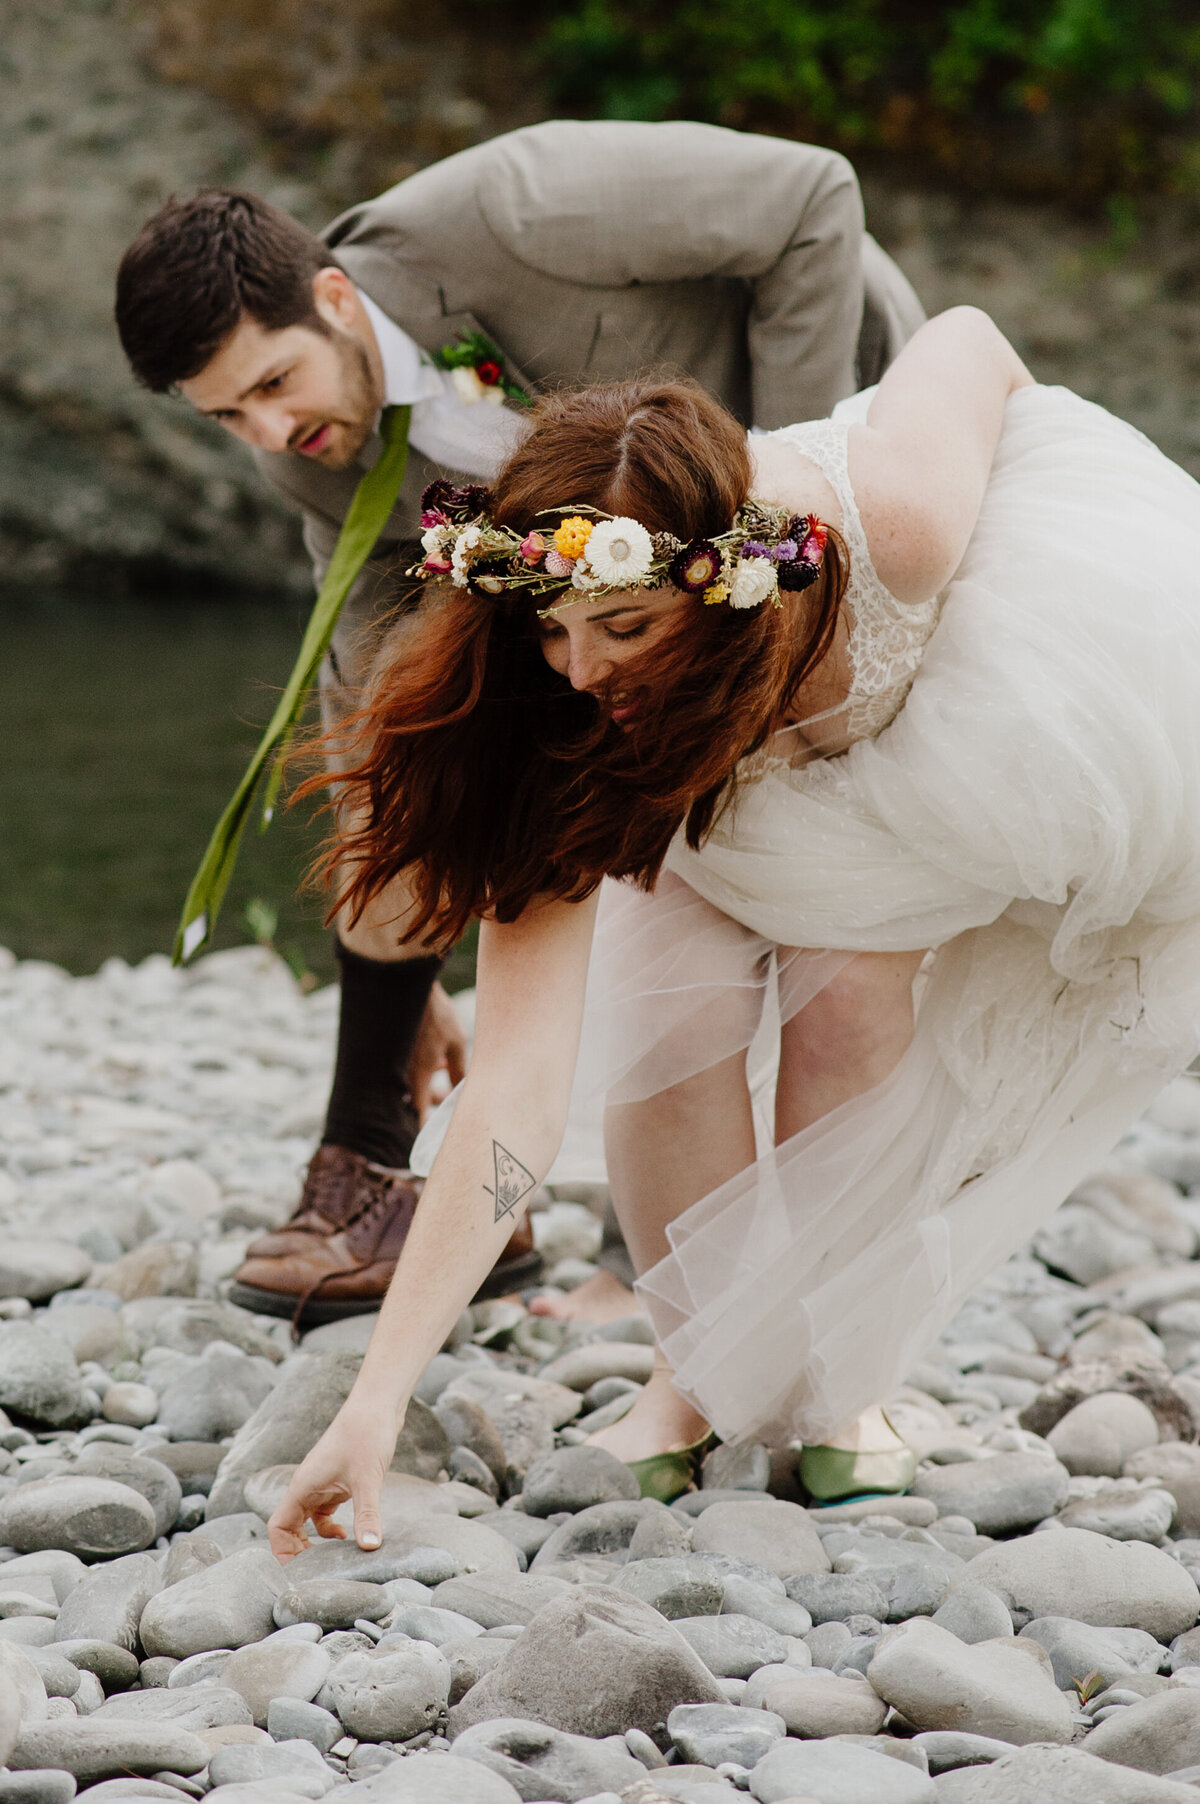 Bride and groom collect heart rocks from the riverbed at their Pamplin Grove redwood wedding